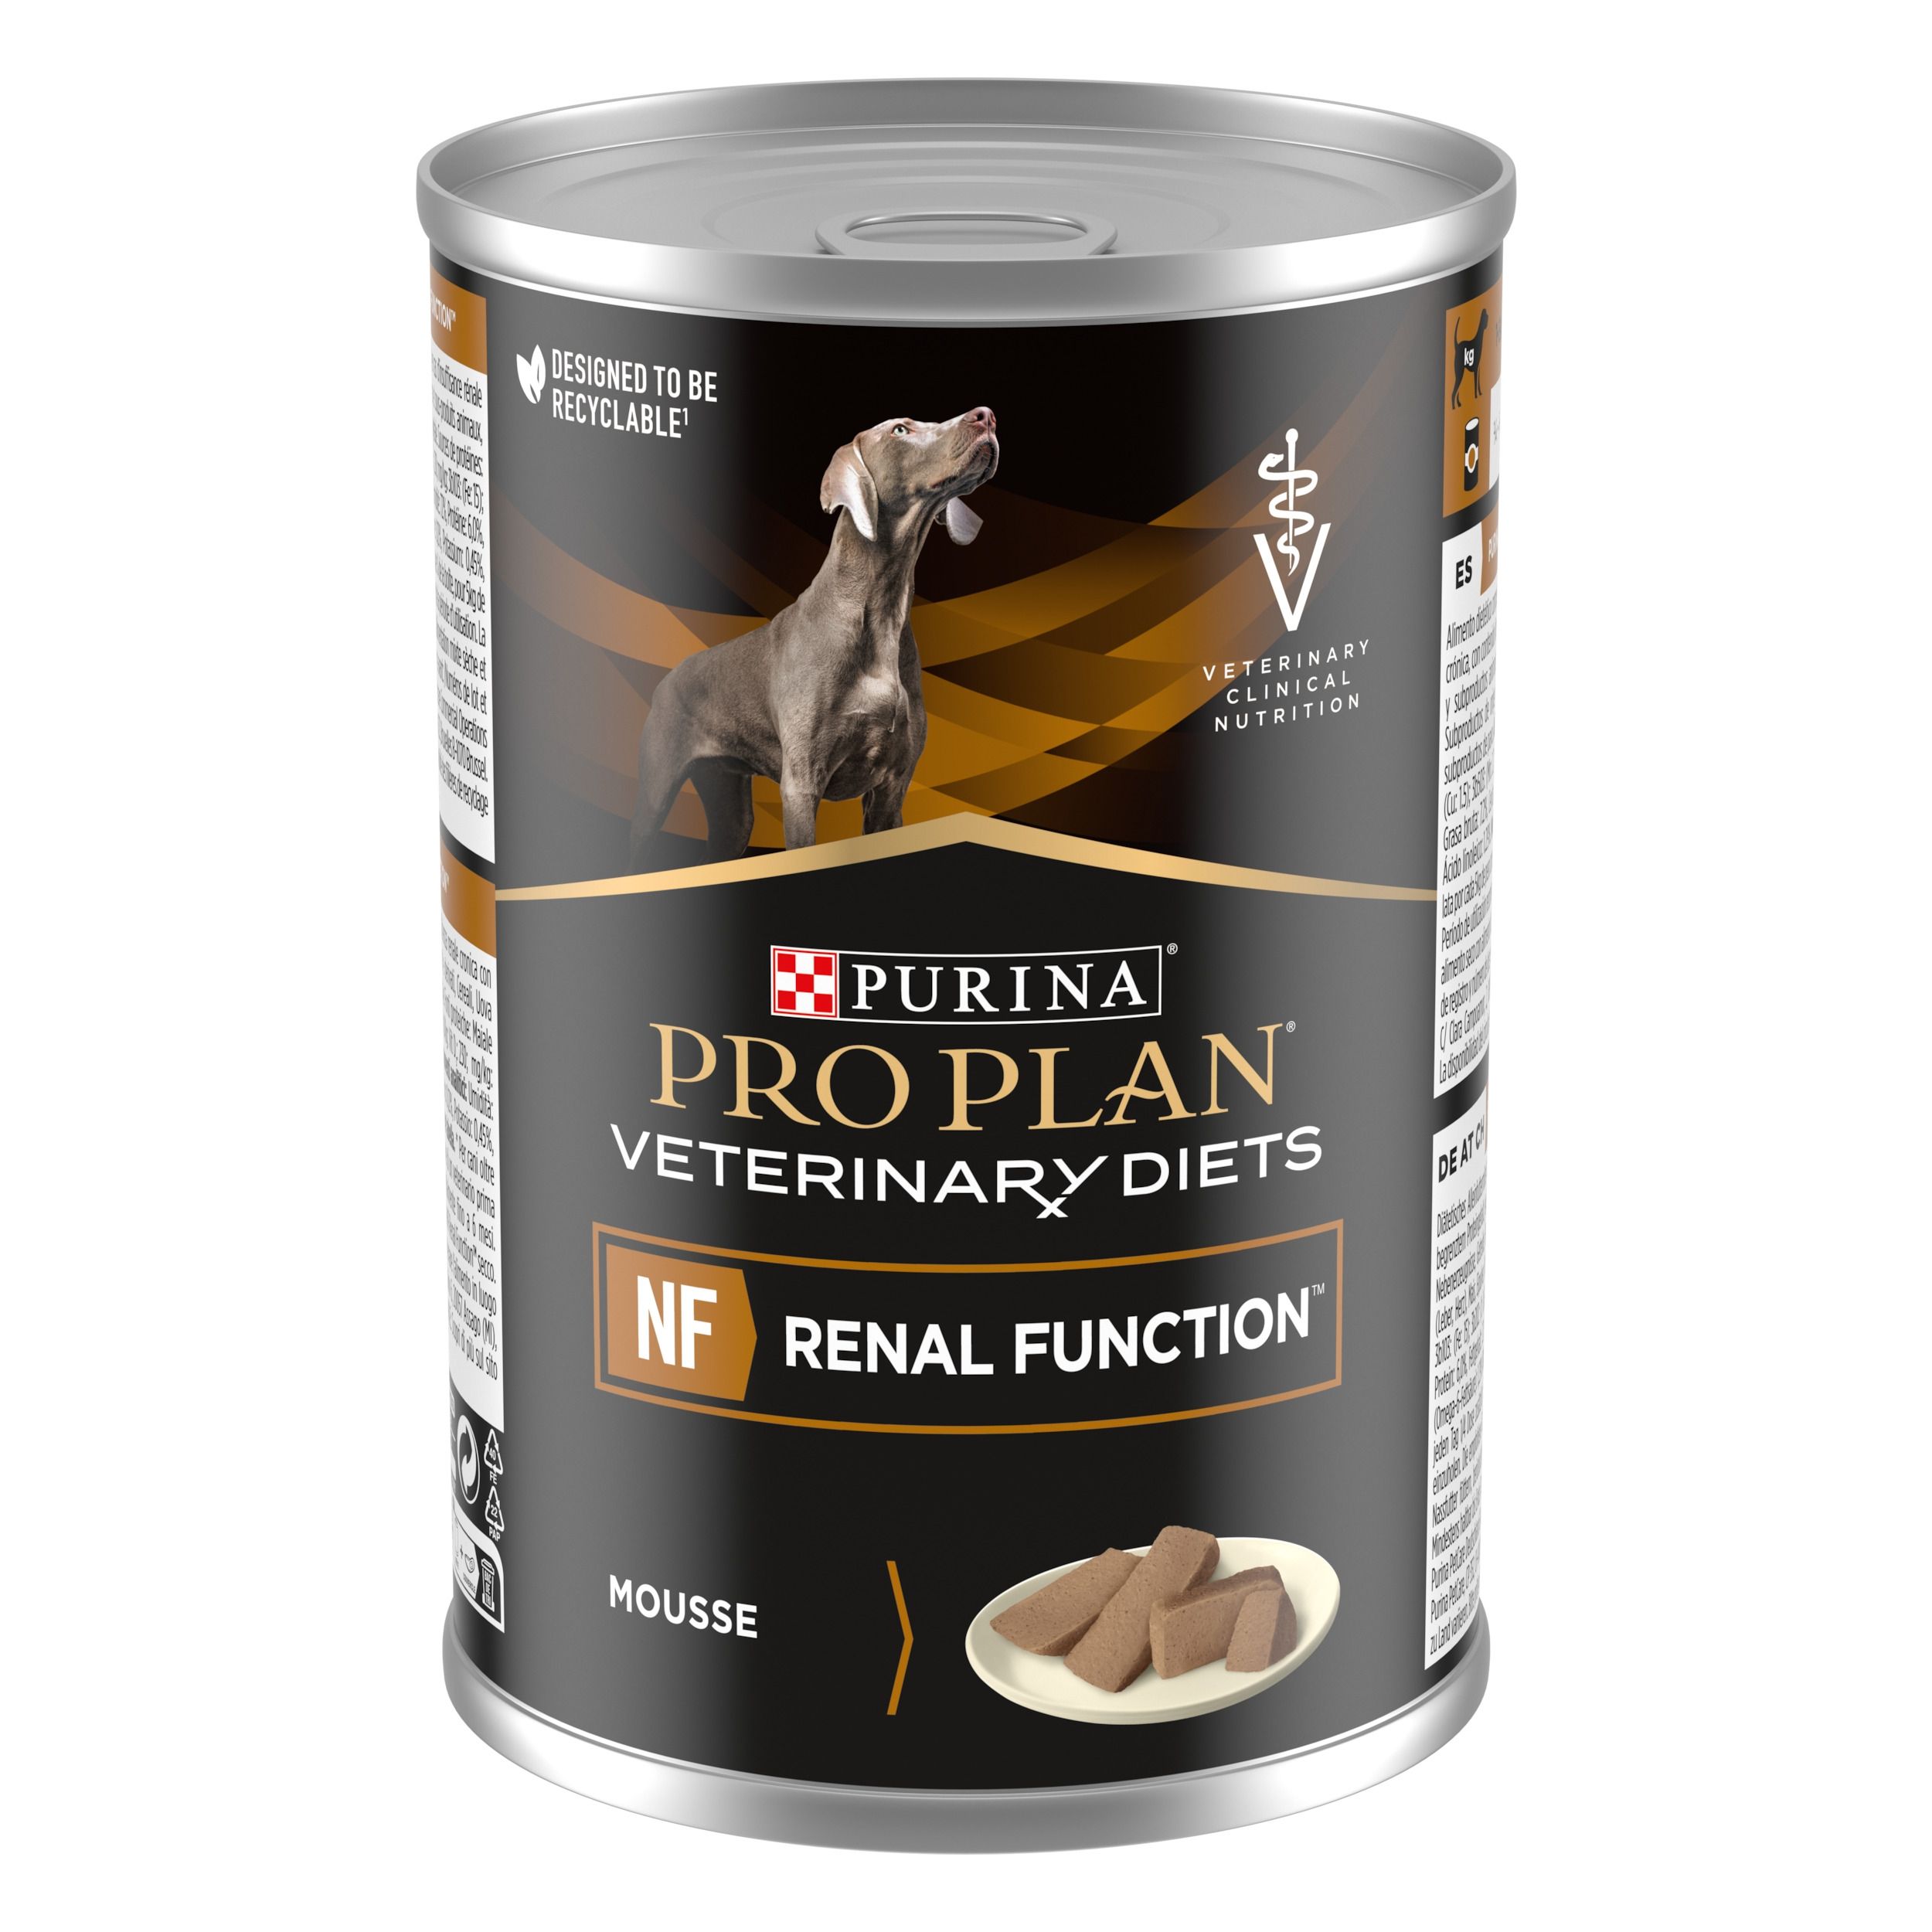 PURINA PRO PLAN VETERINARY DIETS NF Renal Function Mousse, 400 g 400